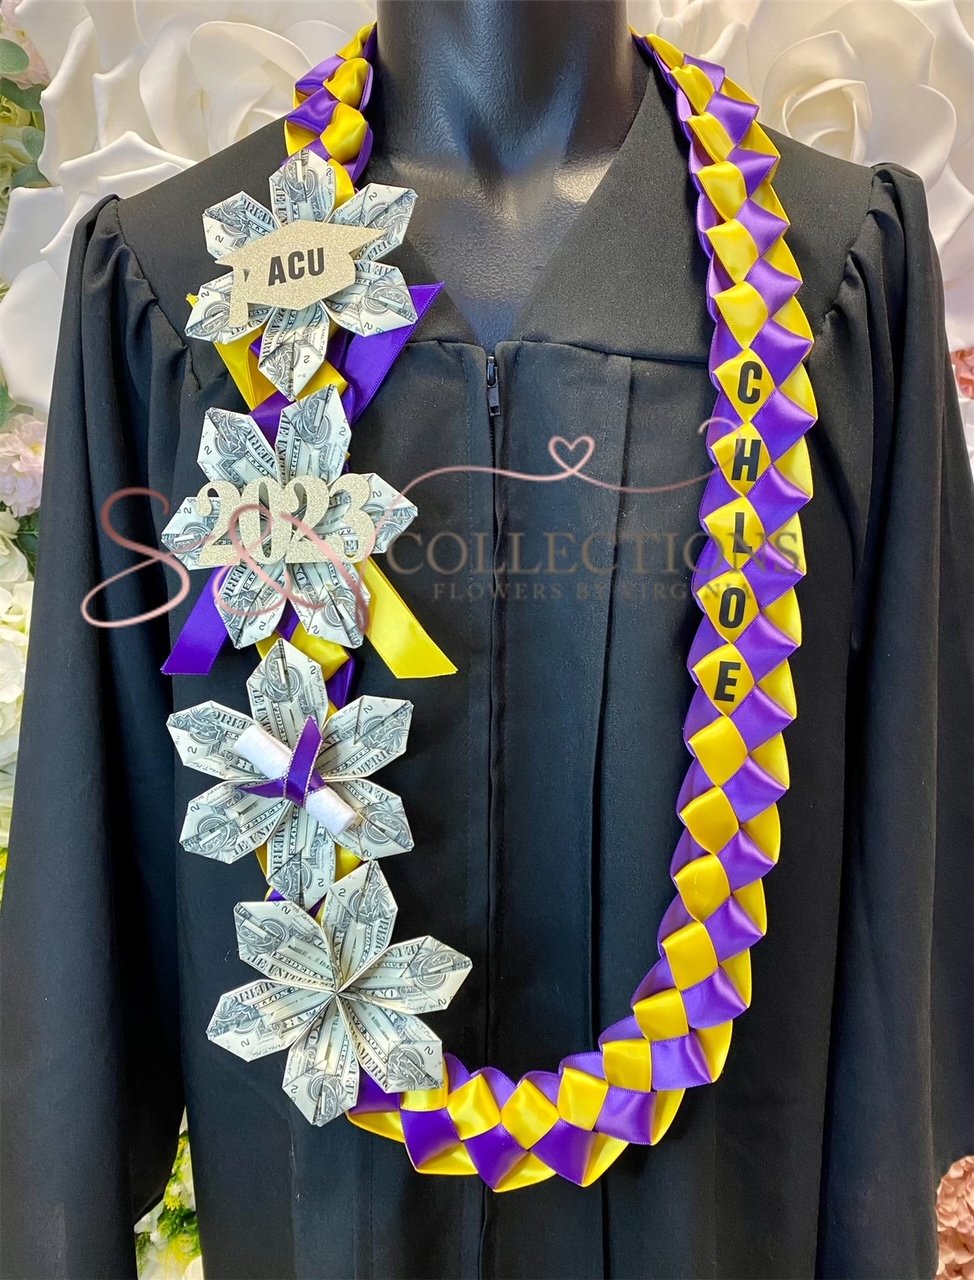 4 Flower Graduation Lei - #01 — S & V Collections